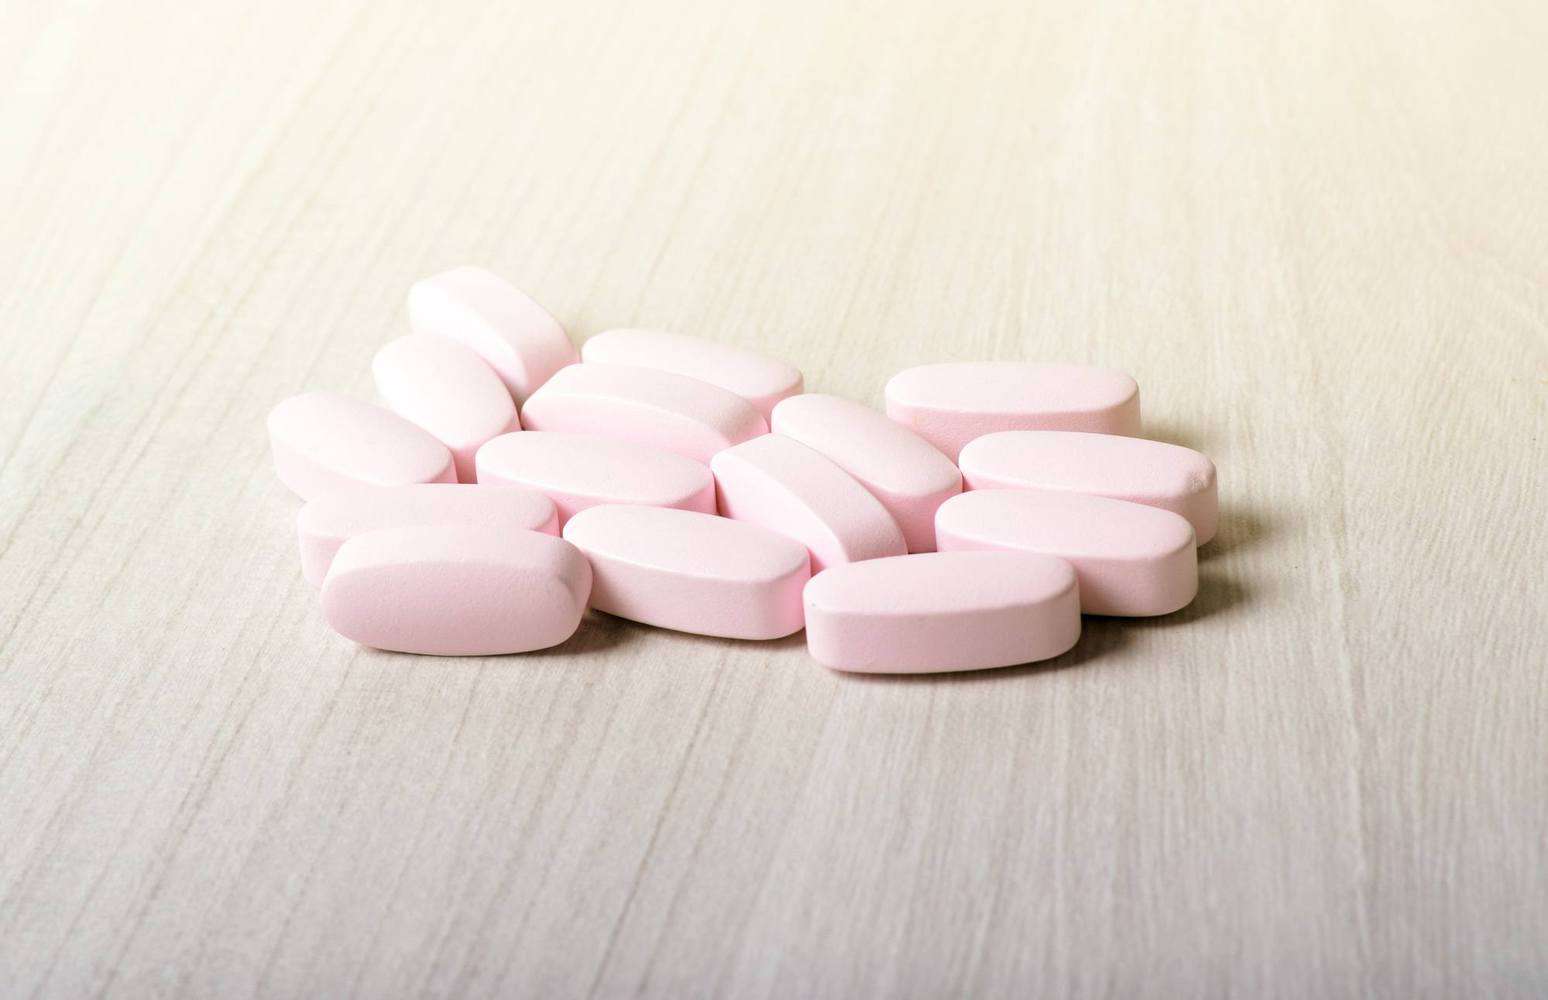 Pink tablets.